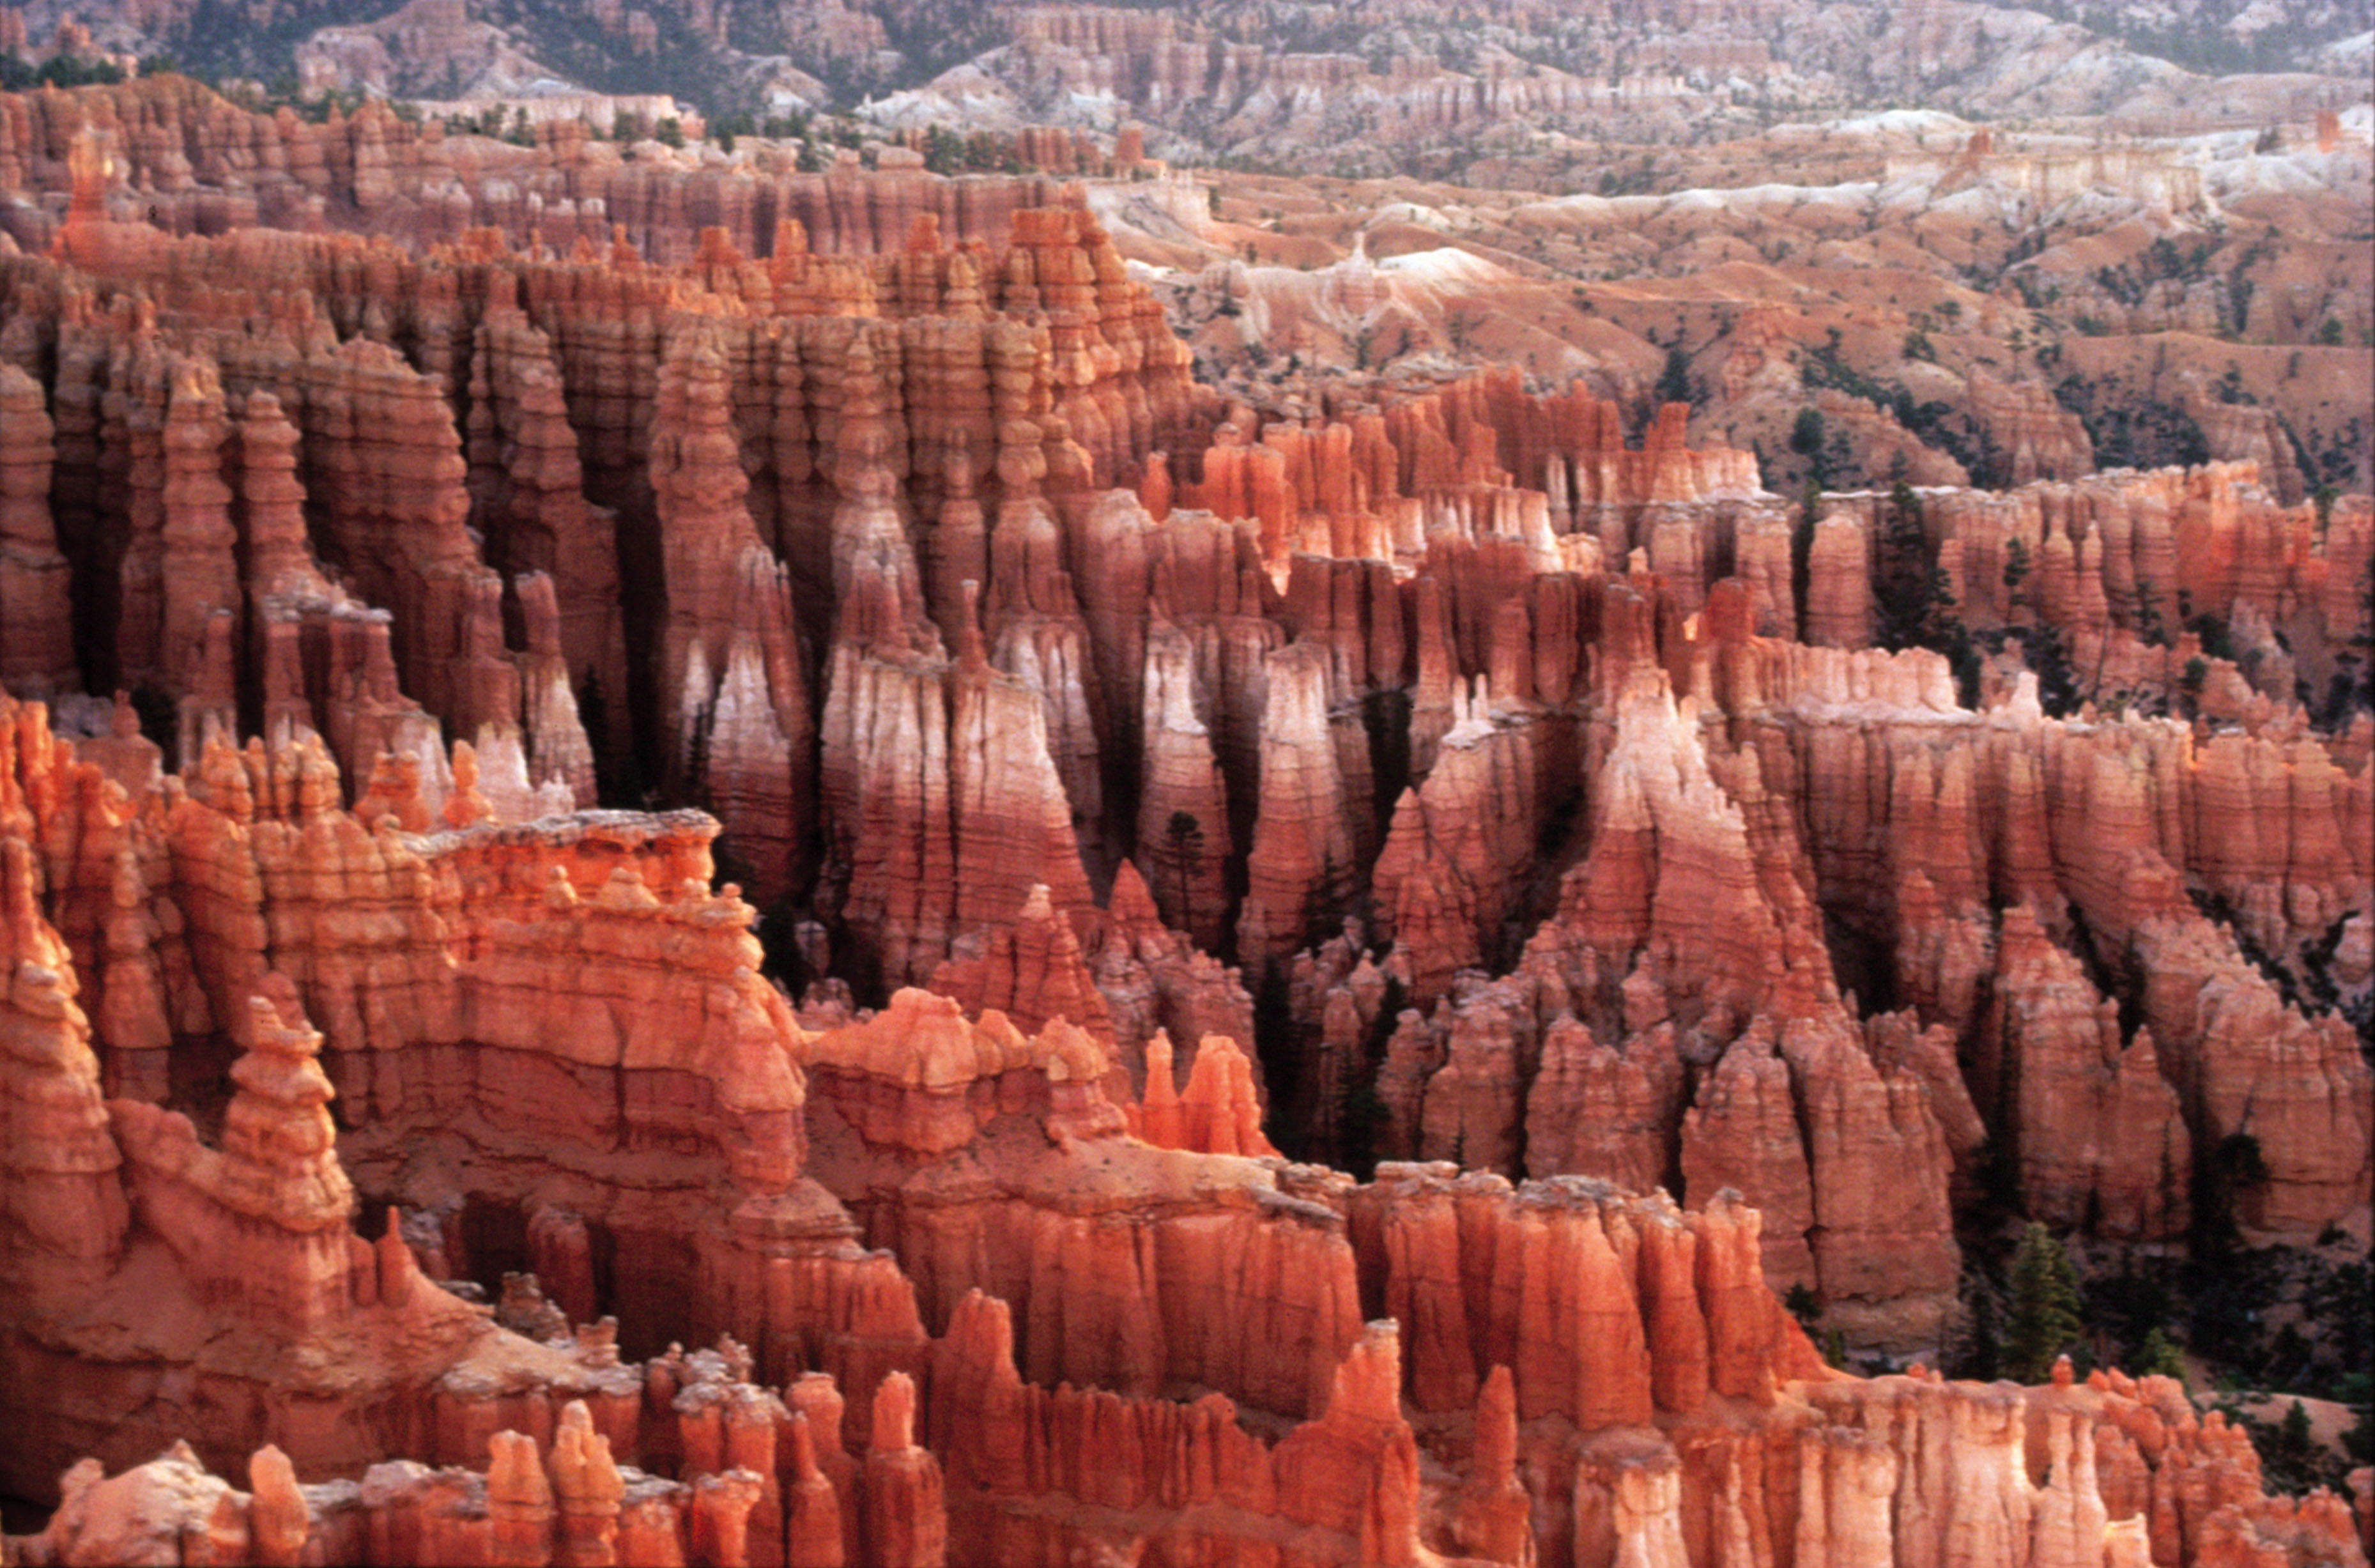 "Hoodoo" means to bewitch, just like Bryce Canyon's rock formations do